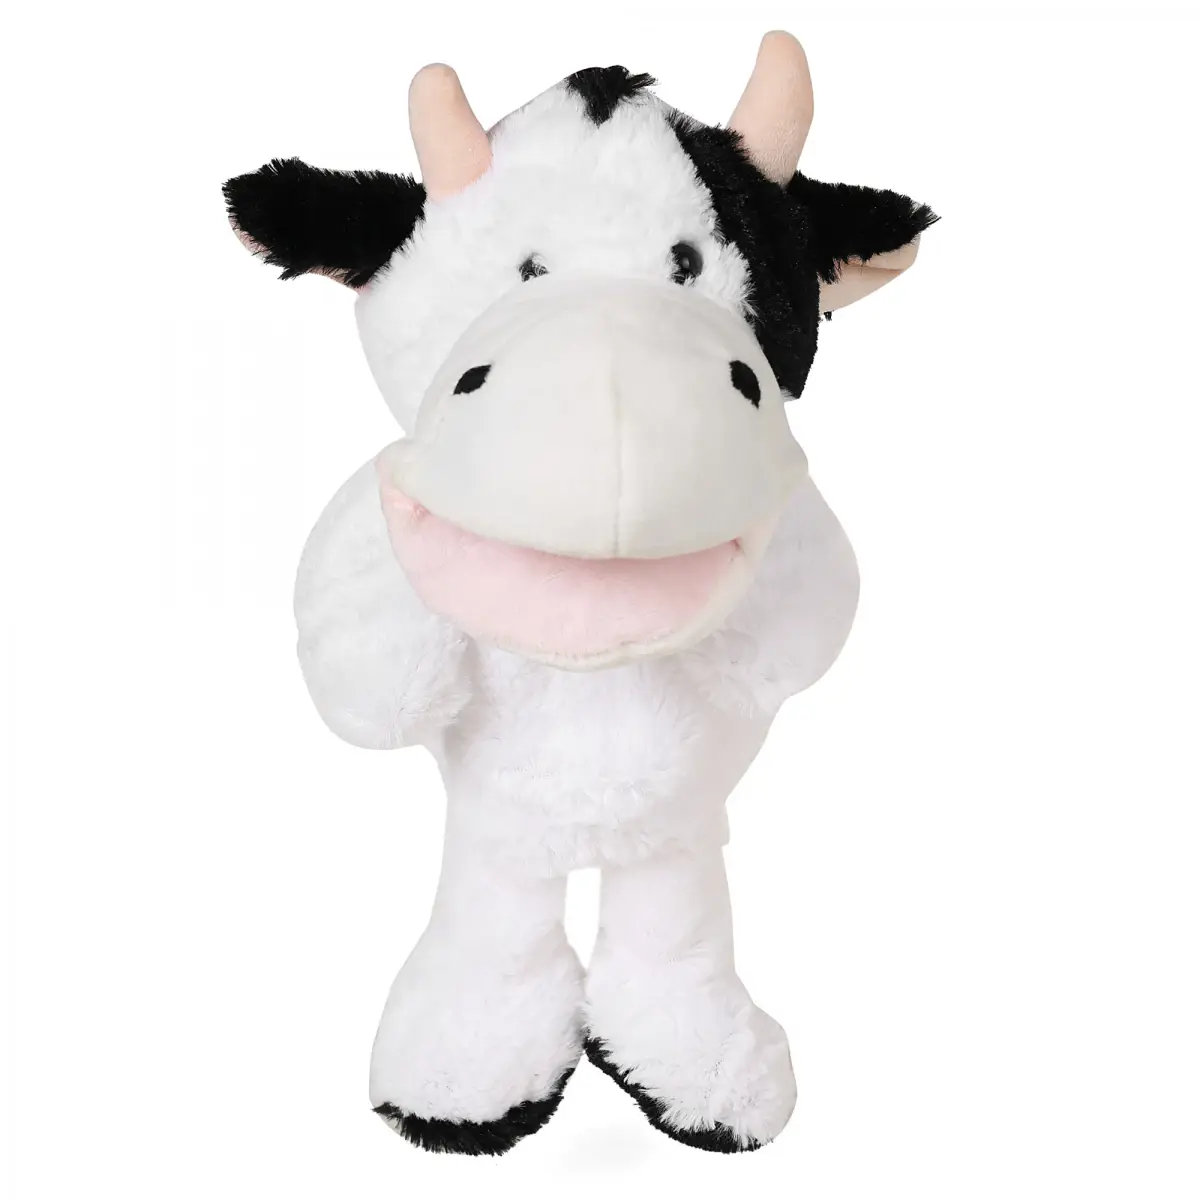 Hamleys Pugs & Play Cow Talking Hand Puppet, 3Y+, Black & White